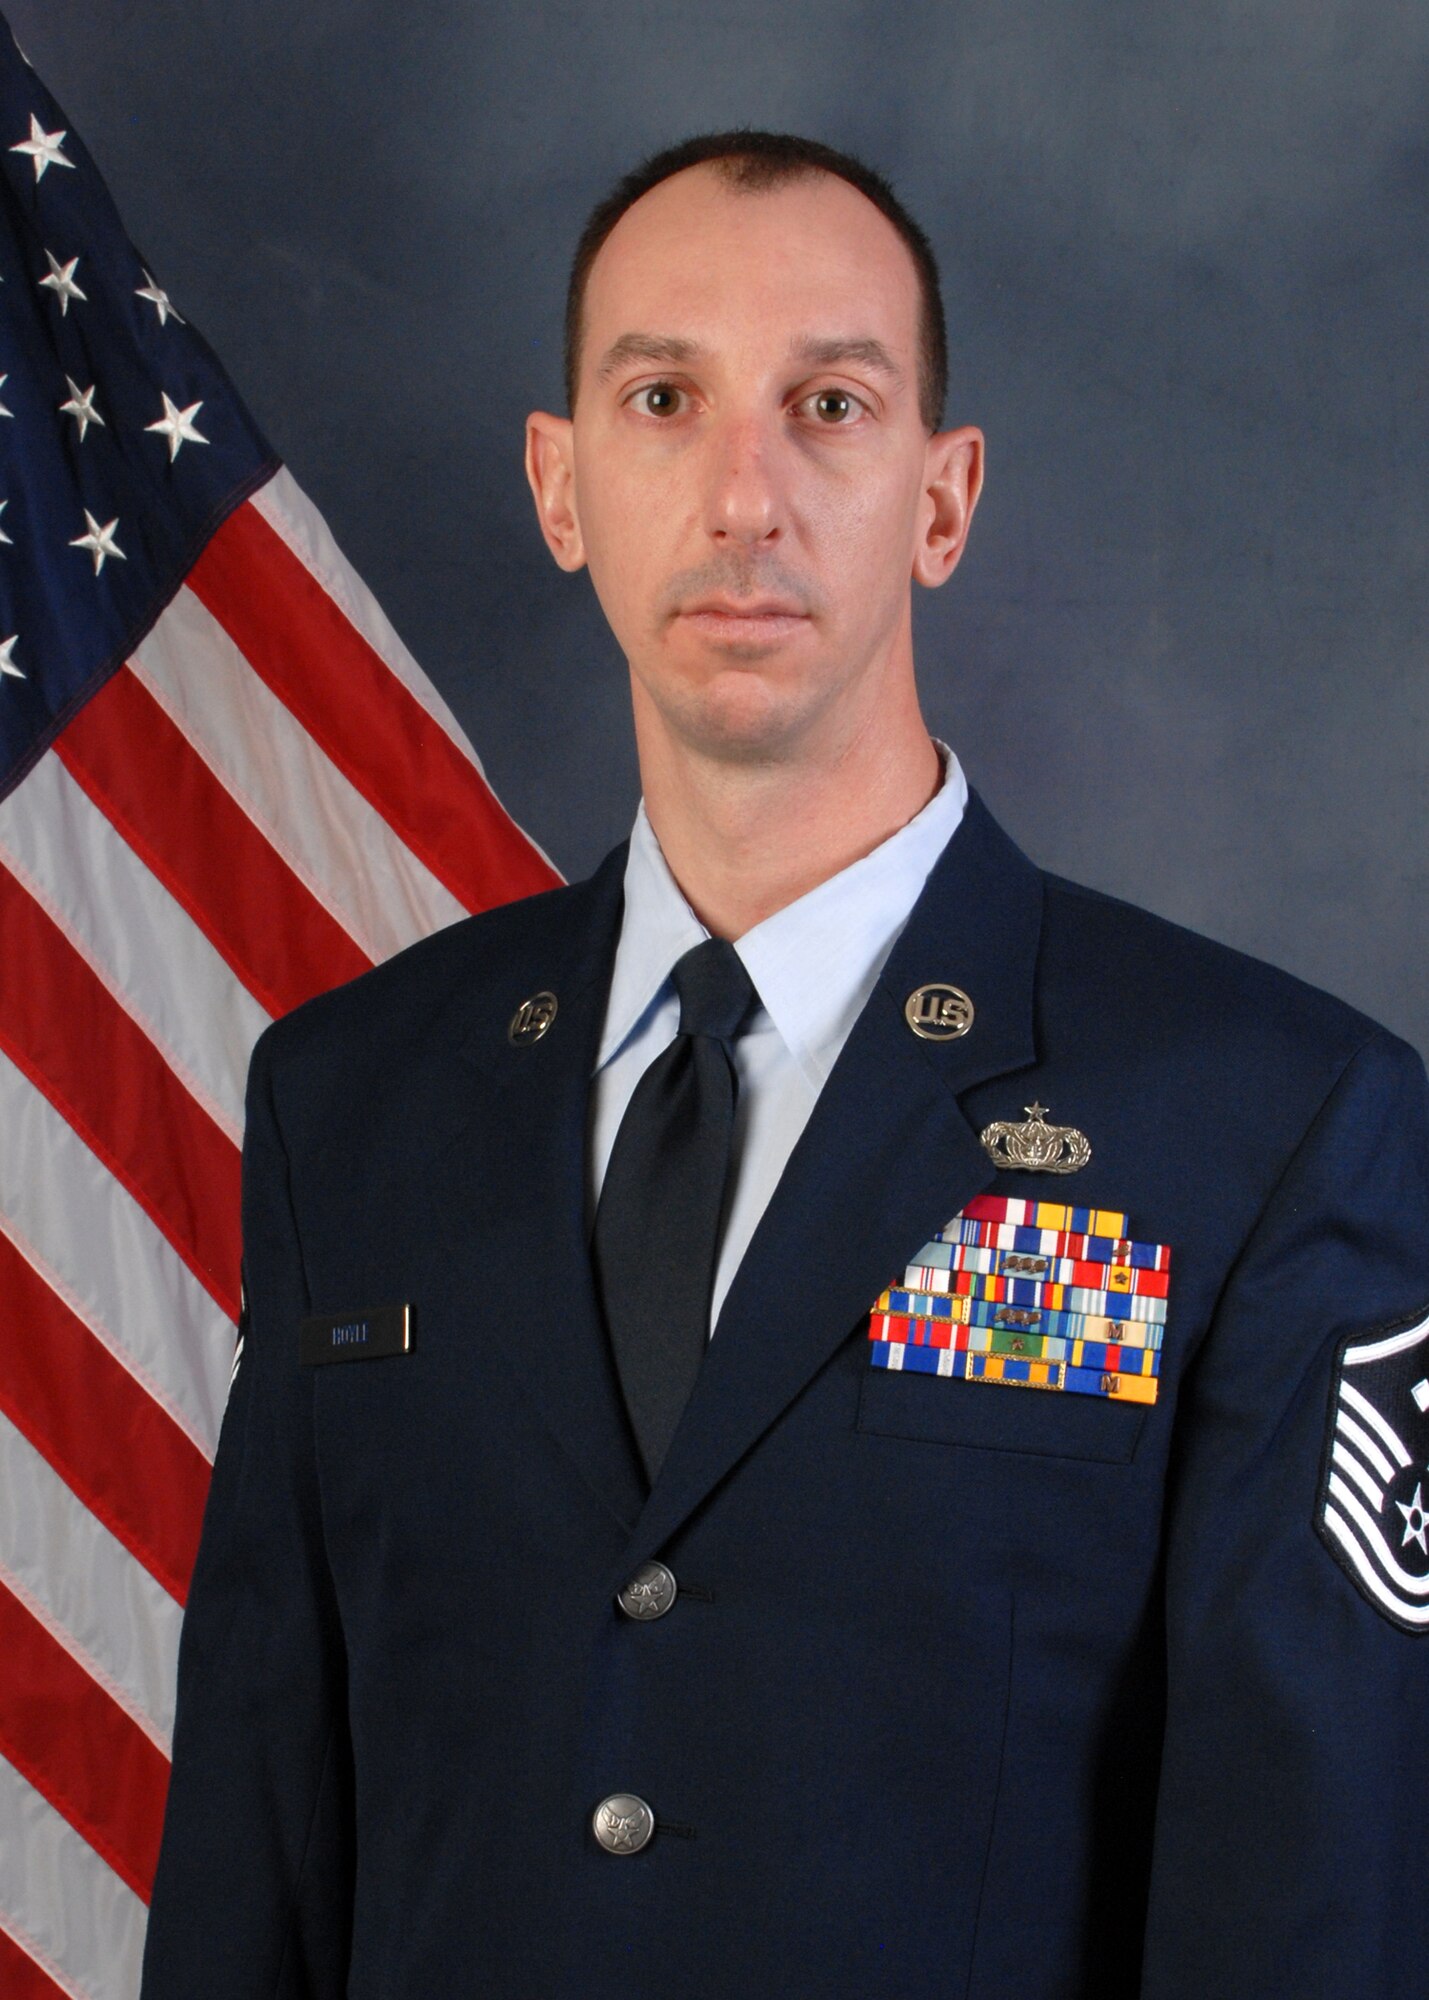 Master Sgt. Andrew Hoyle, 173rd Security Forces Squadron, was selected as the 2013 First Sgt. of the Year  for the 173rd Fighter Wing.  (U.S. Air National Guard photo by Tech. Sgt. Jefferson Thompson, released)